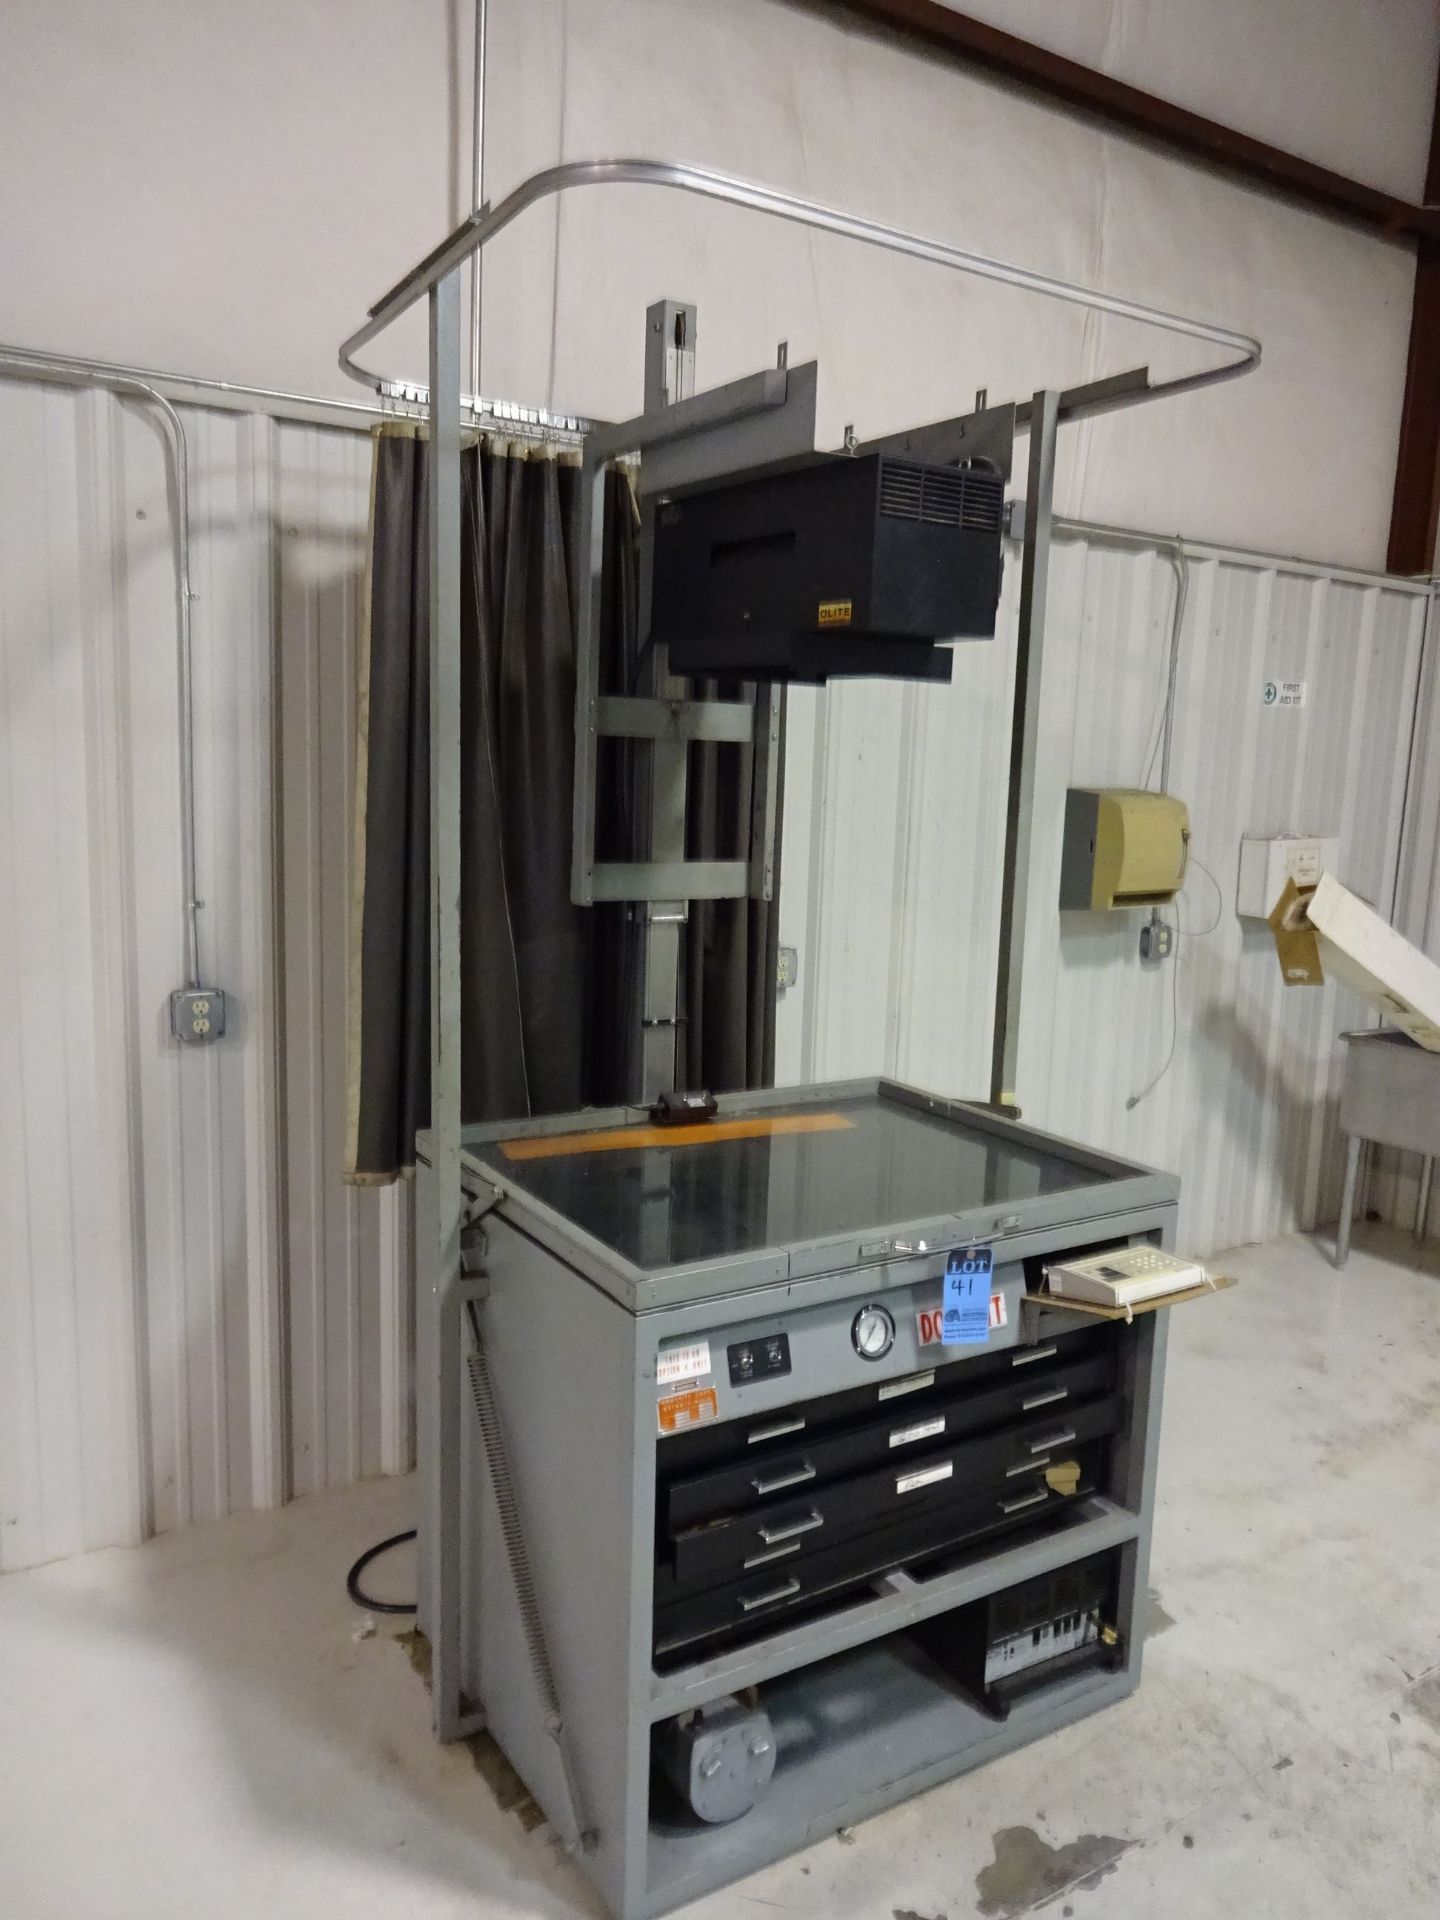 30" X 40" DOUTHITT TYPE DCOP CONSOLE OVERHEAD PLATEMAKER; S/N 67772, WITH OLITE AL53 TRI-LEVEL